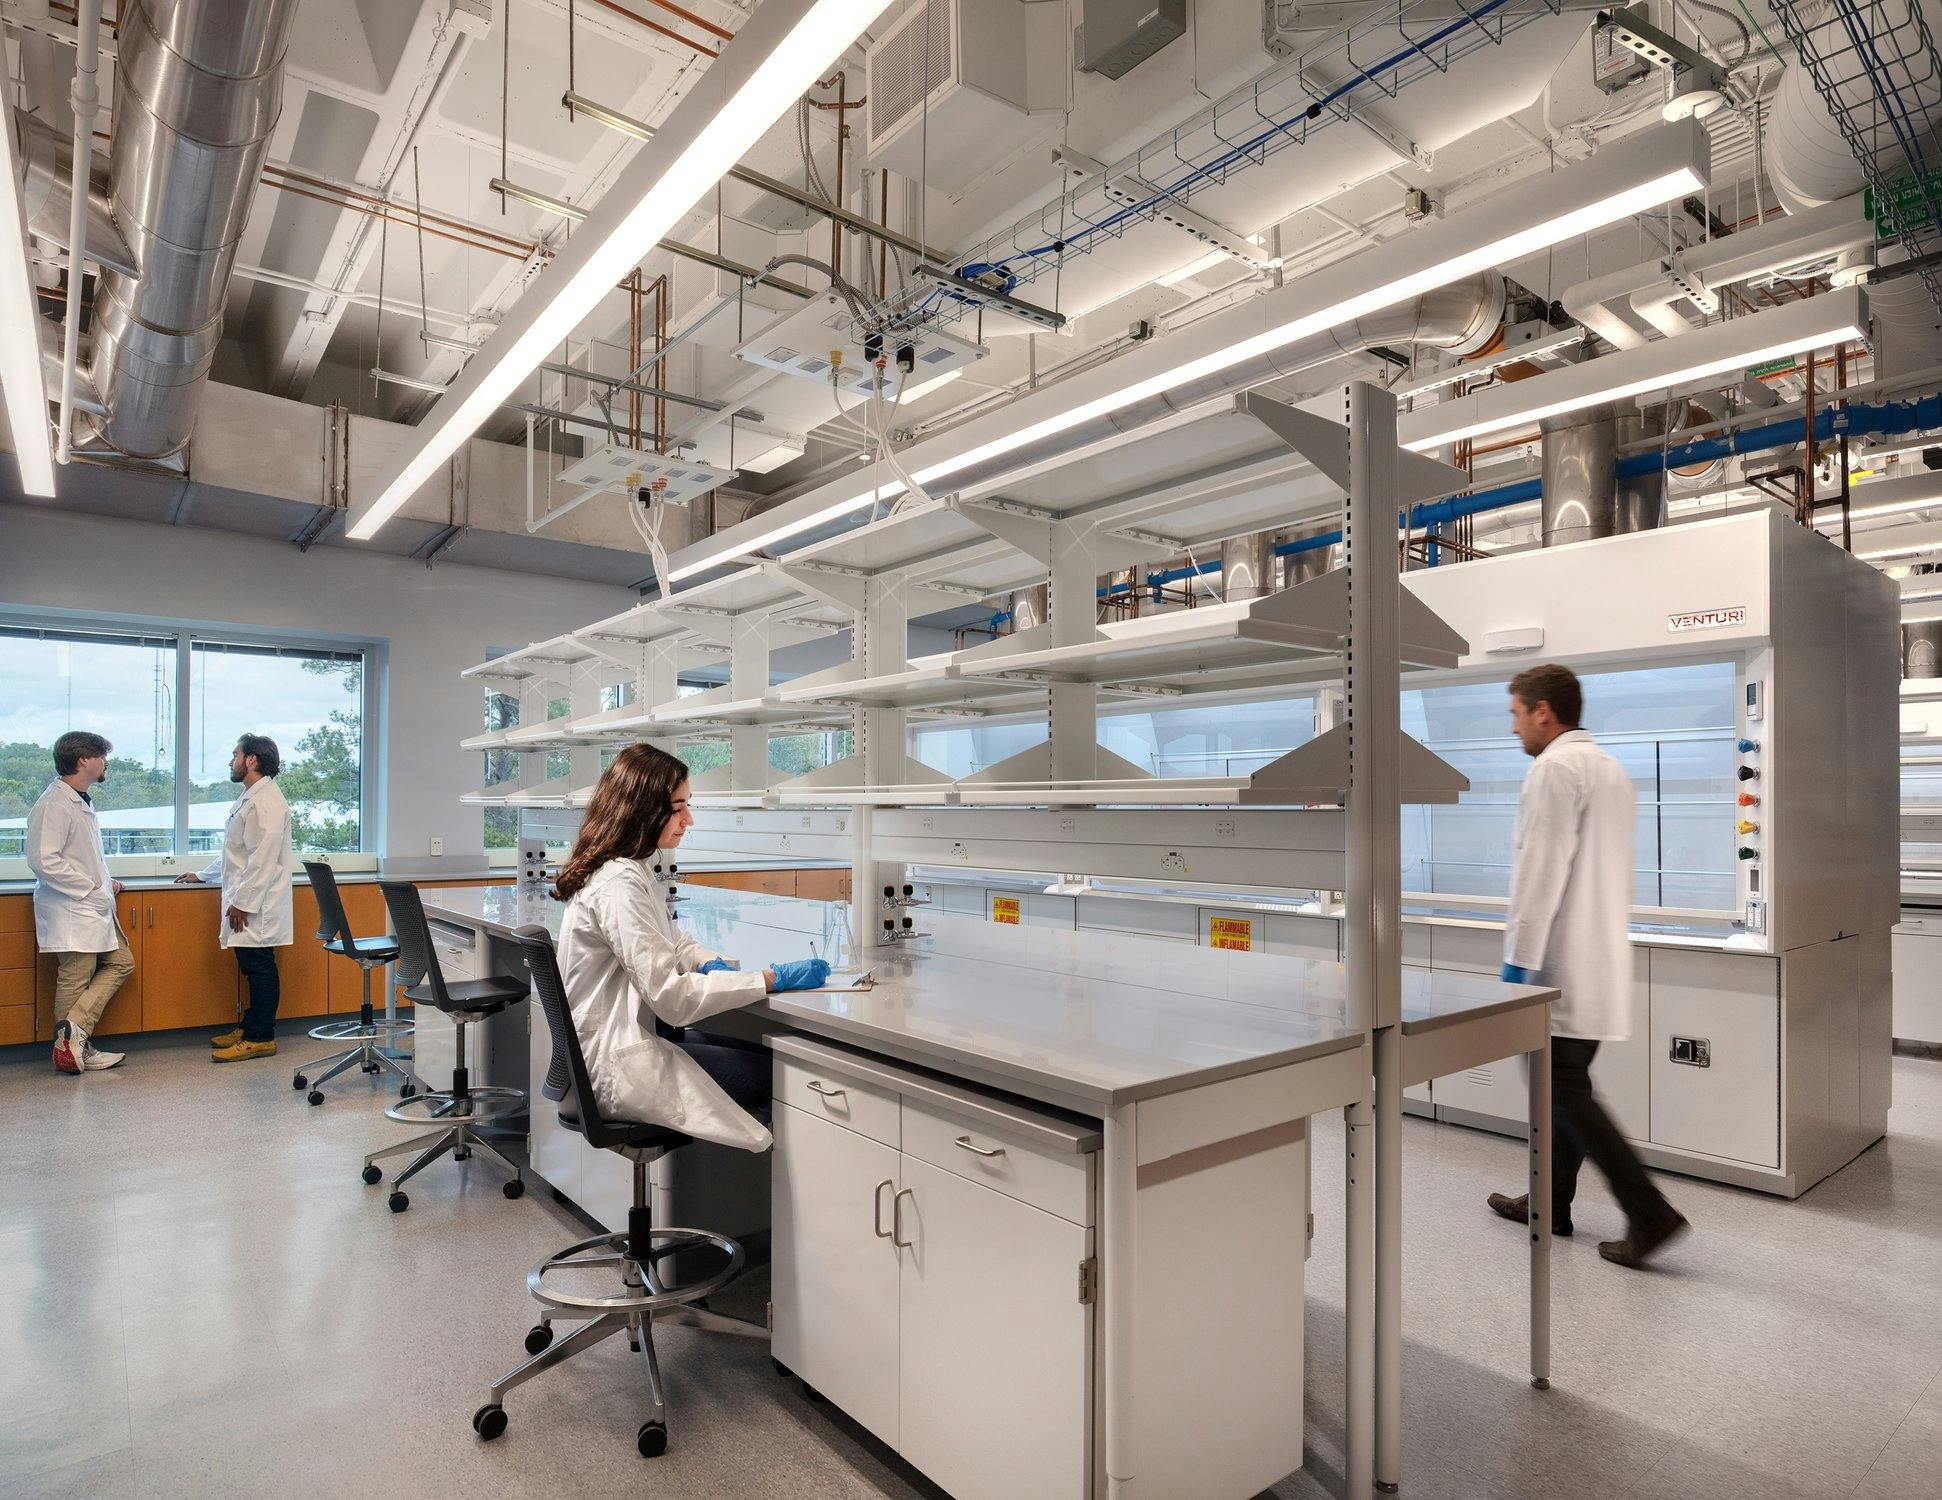 Atwood Chemistry Research Lab at Emory University